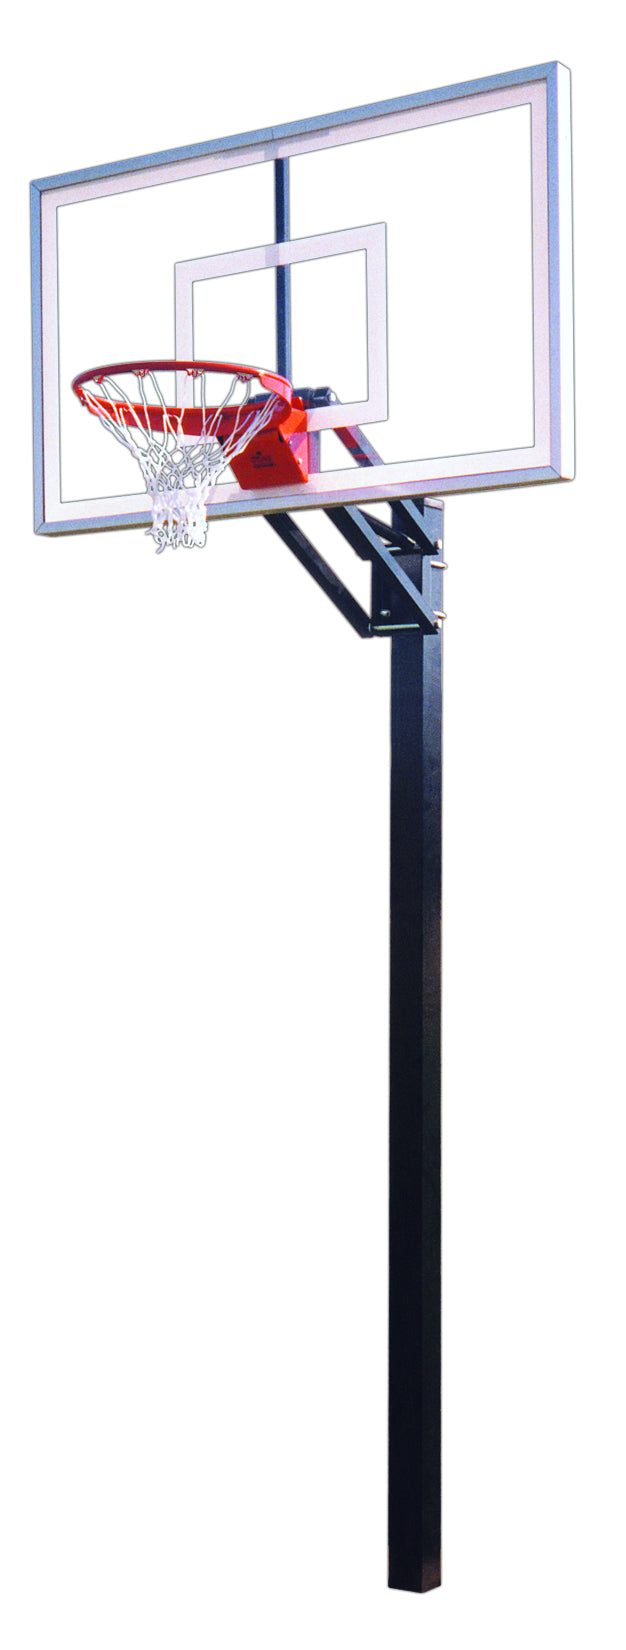 First Team Champ Nitro In Ground Basketball Goal - 36"x60" Tempered Glass